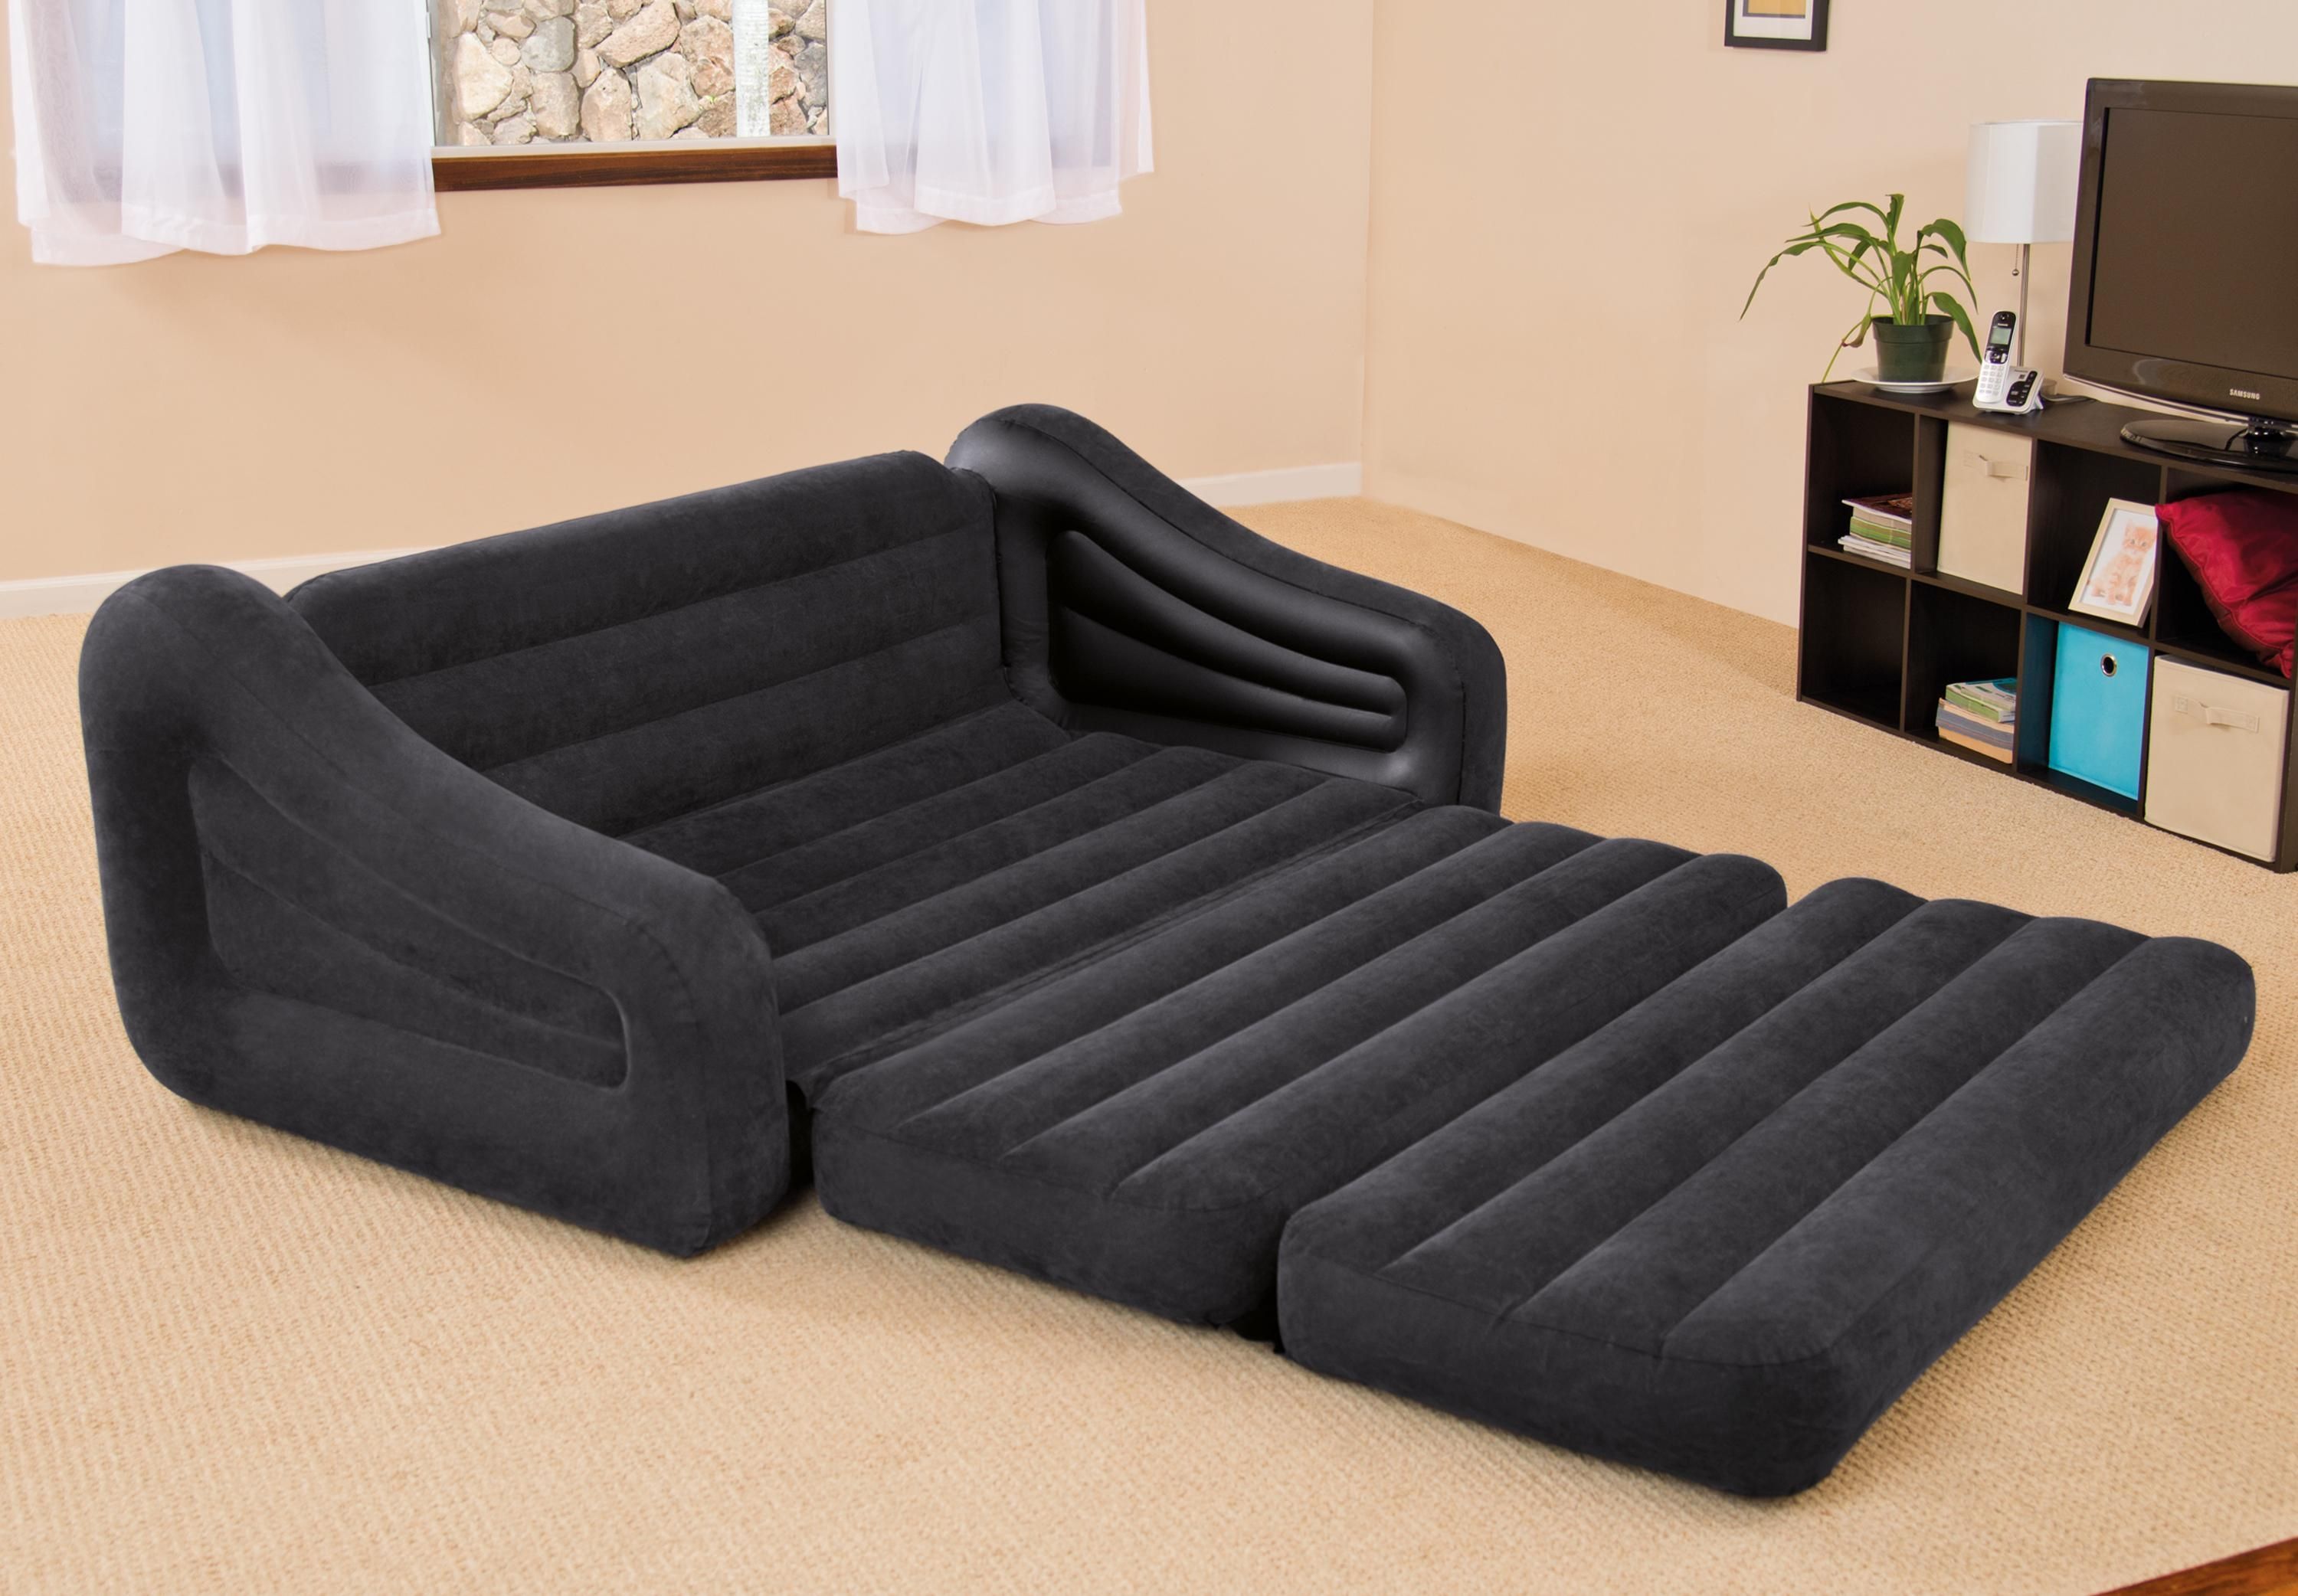 Intex Inflatable Pull Out Sofa & Queen Bed Mattress Sleeper W/ Ac With Regard To Intex Air Couches (View 17 of 20)